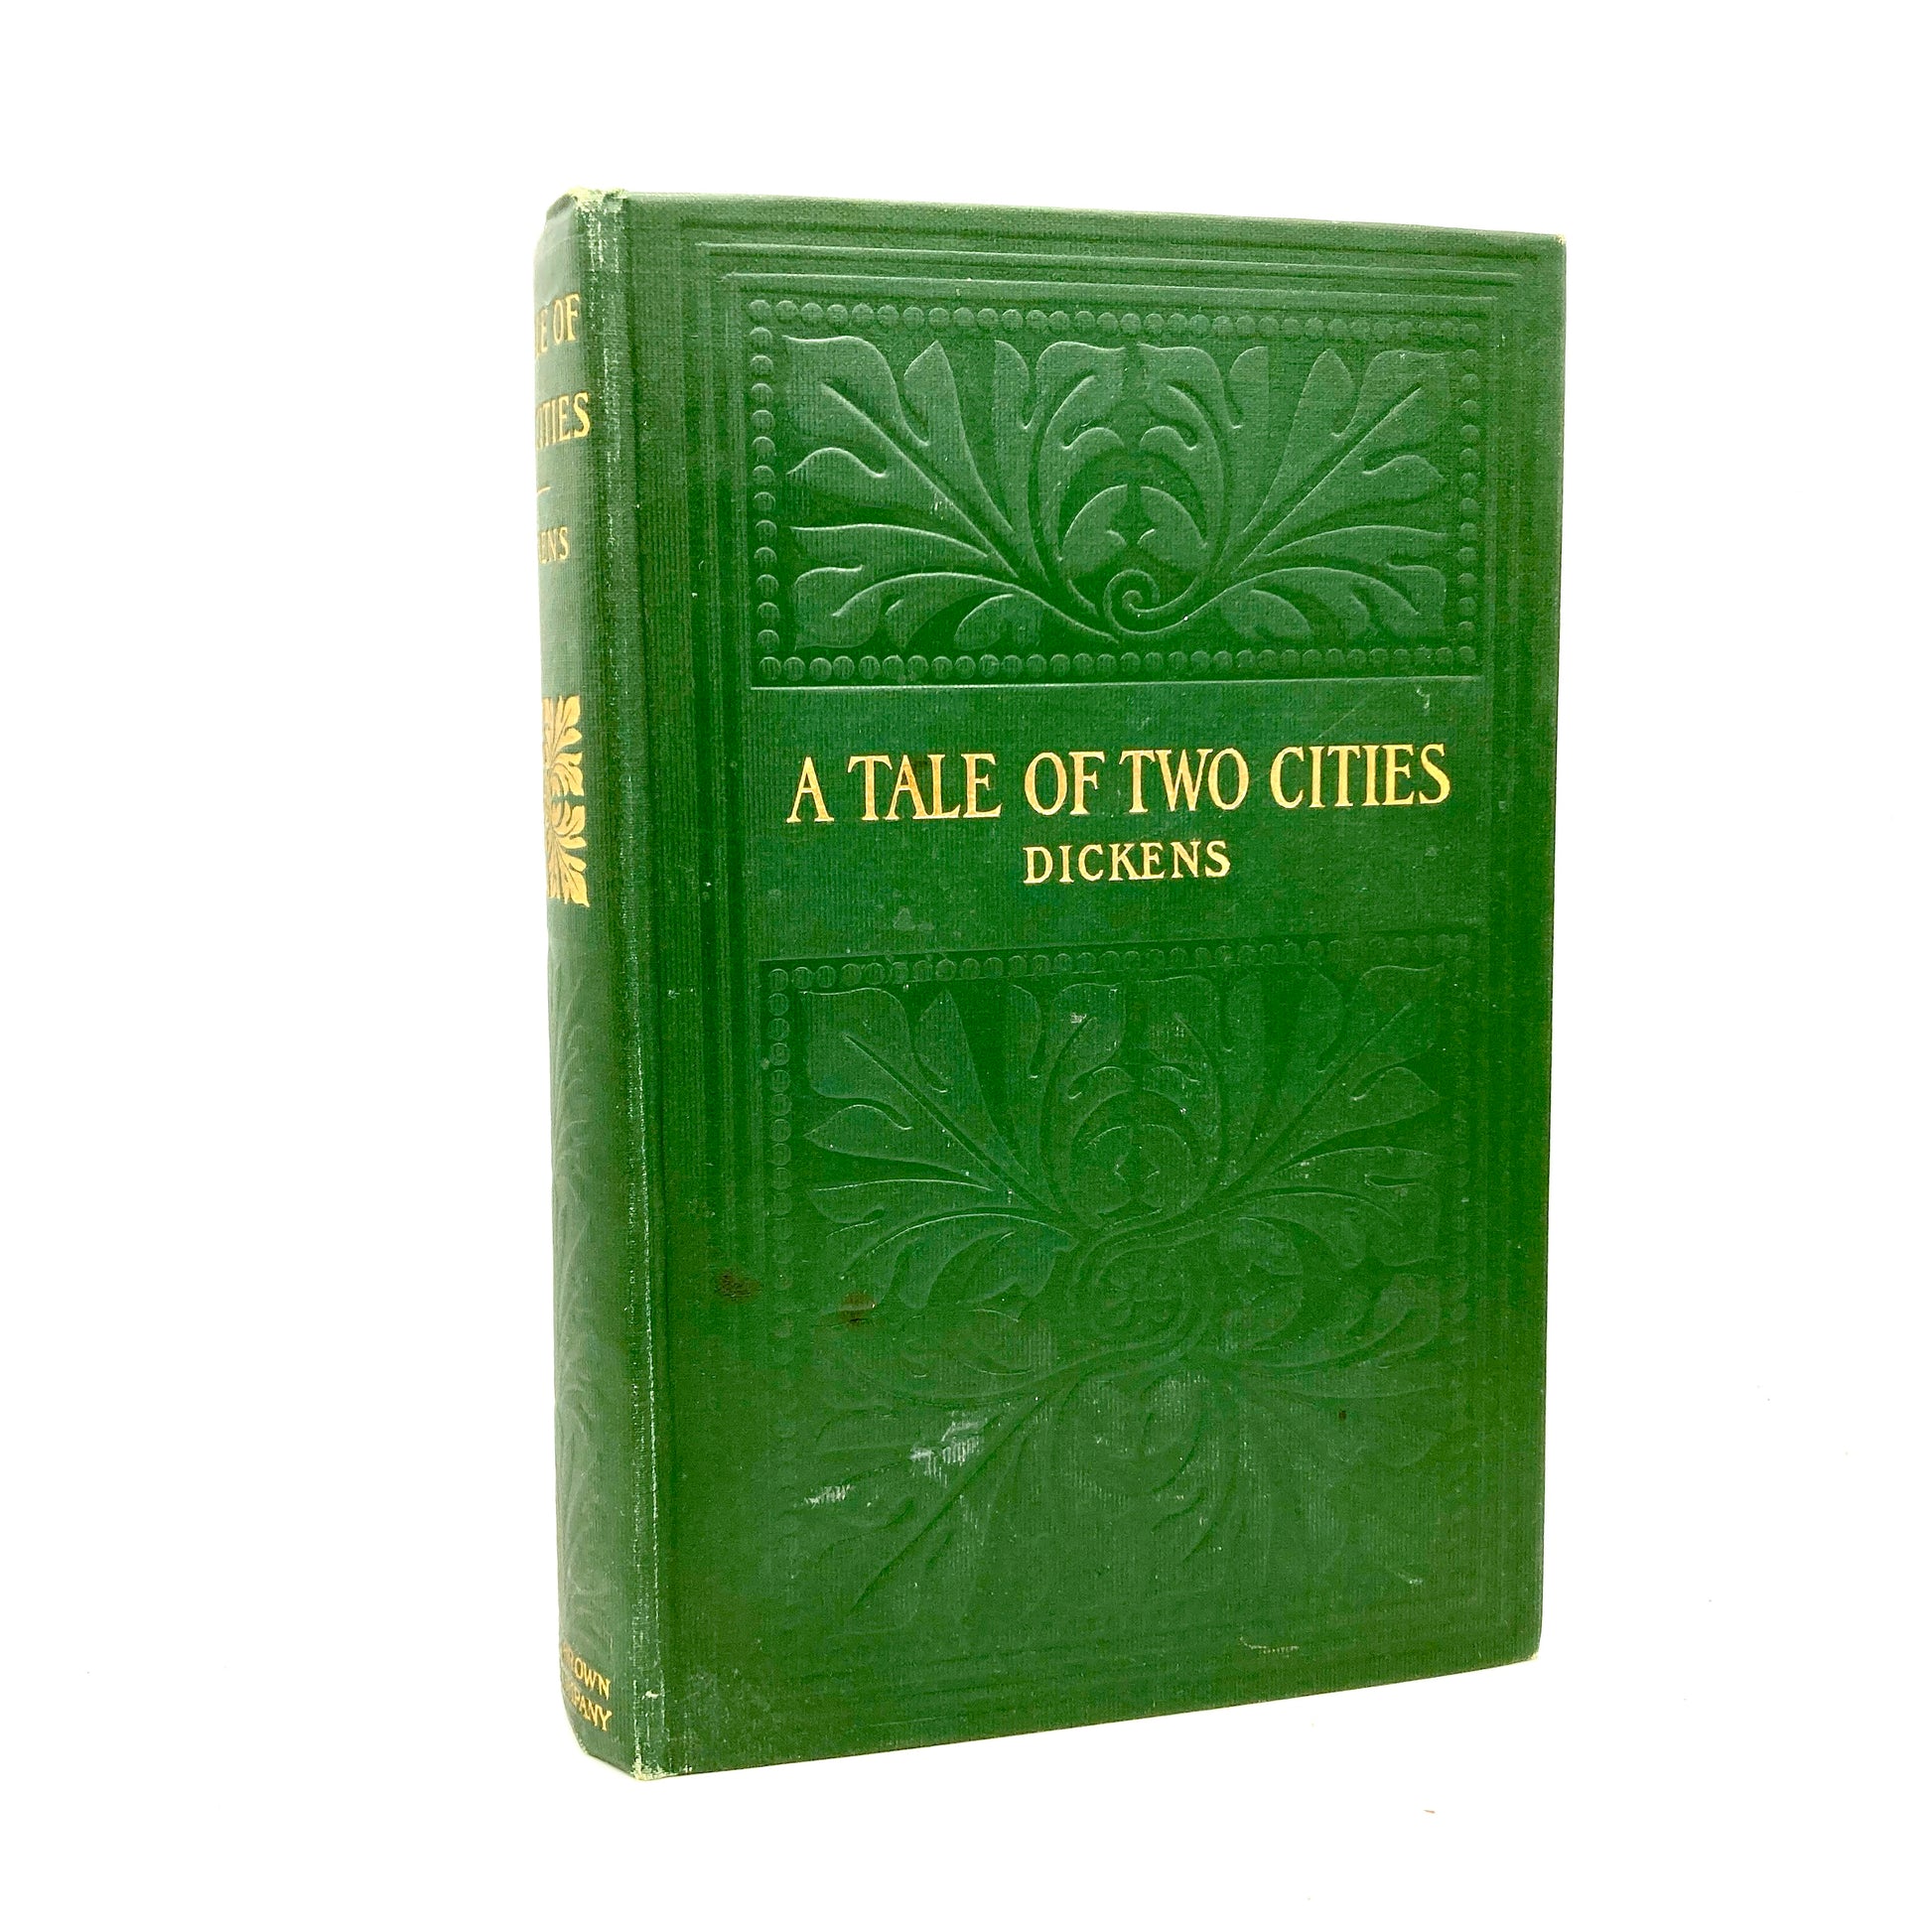 DICKENS, Charles "A Tale of Two Cities" [Little, Brown & Co, c1900] - Buzz Bookstore